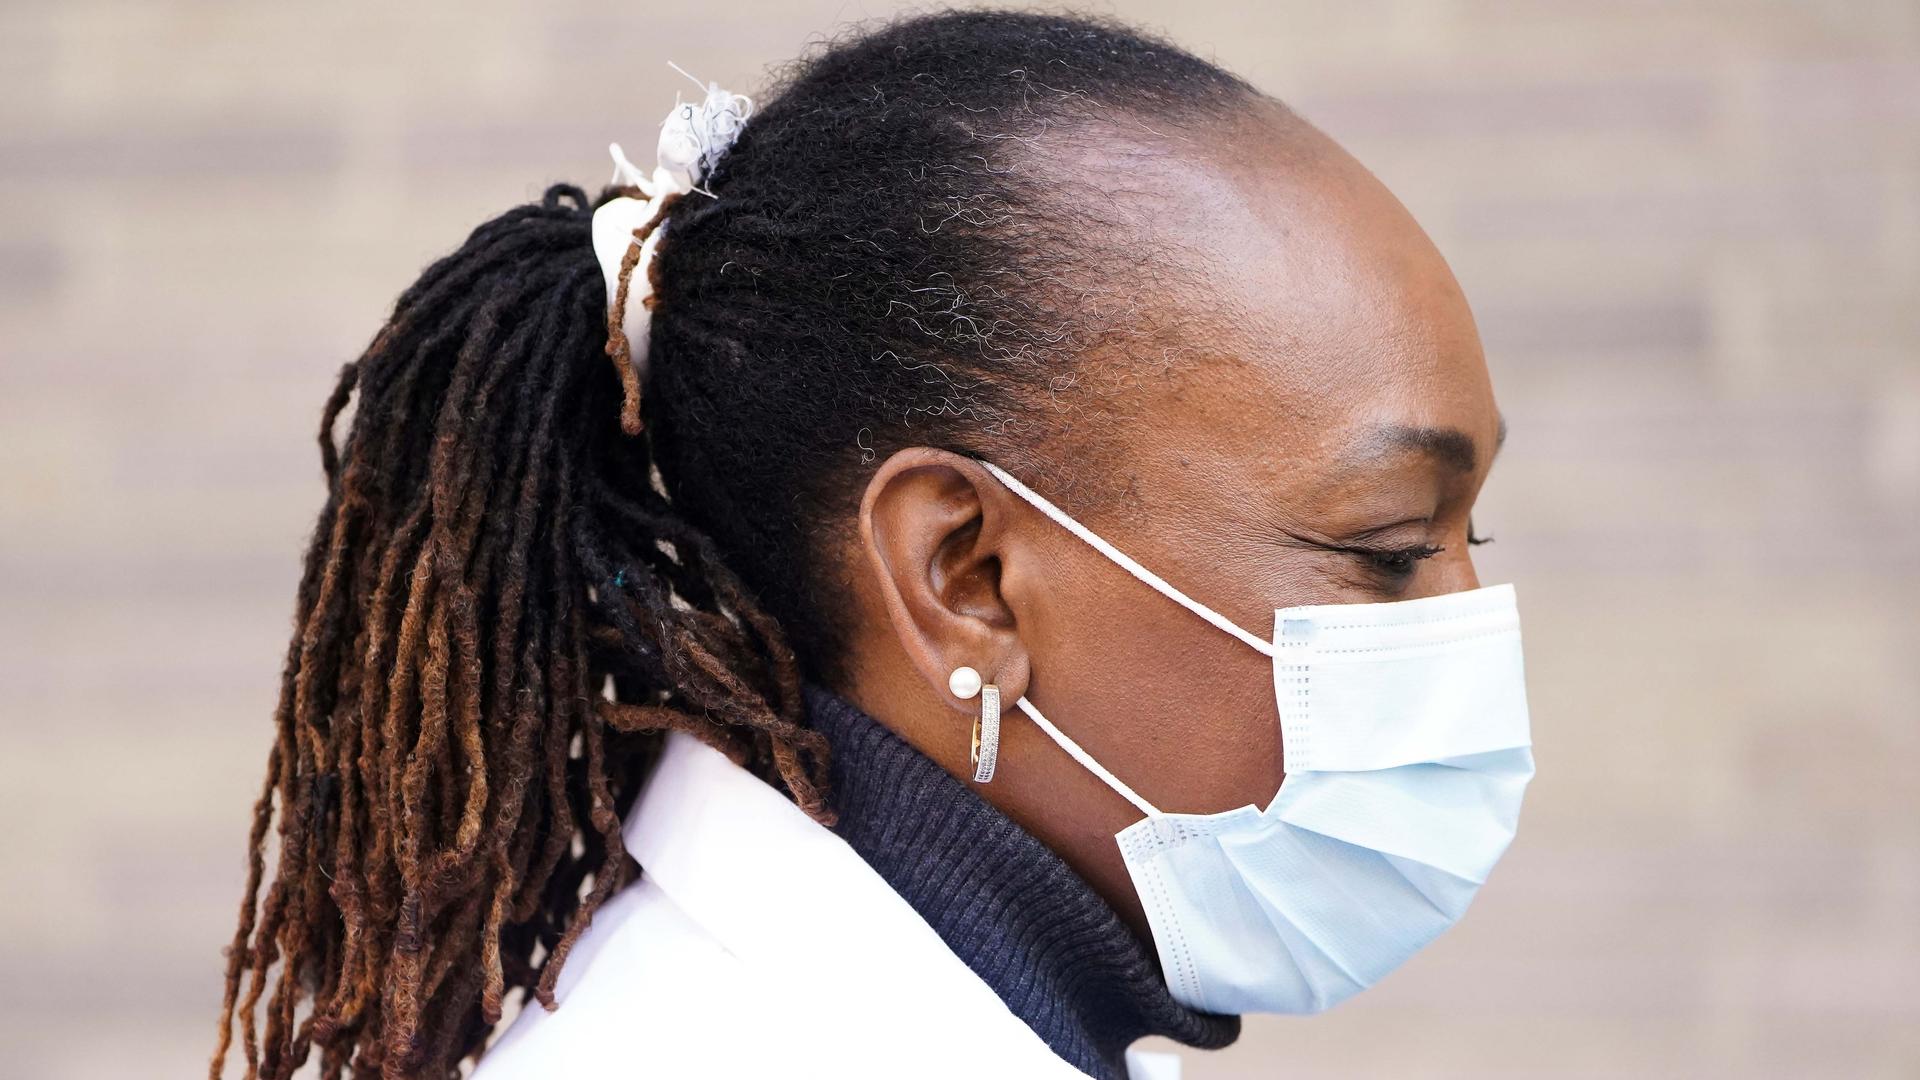 A health care professional wearing a protective face mask walks into a hospital following the outbreak of coronavirus disease (COVID-19), in the Manhattan borough of New York City, New York, US, on March 18, 2020.